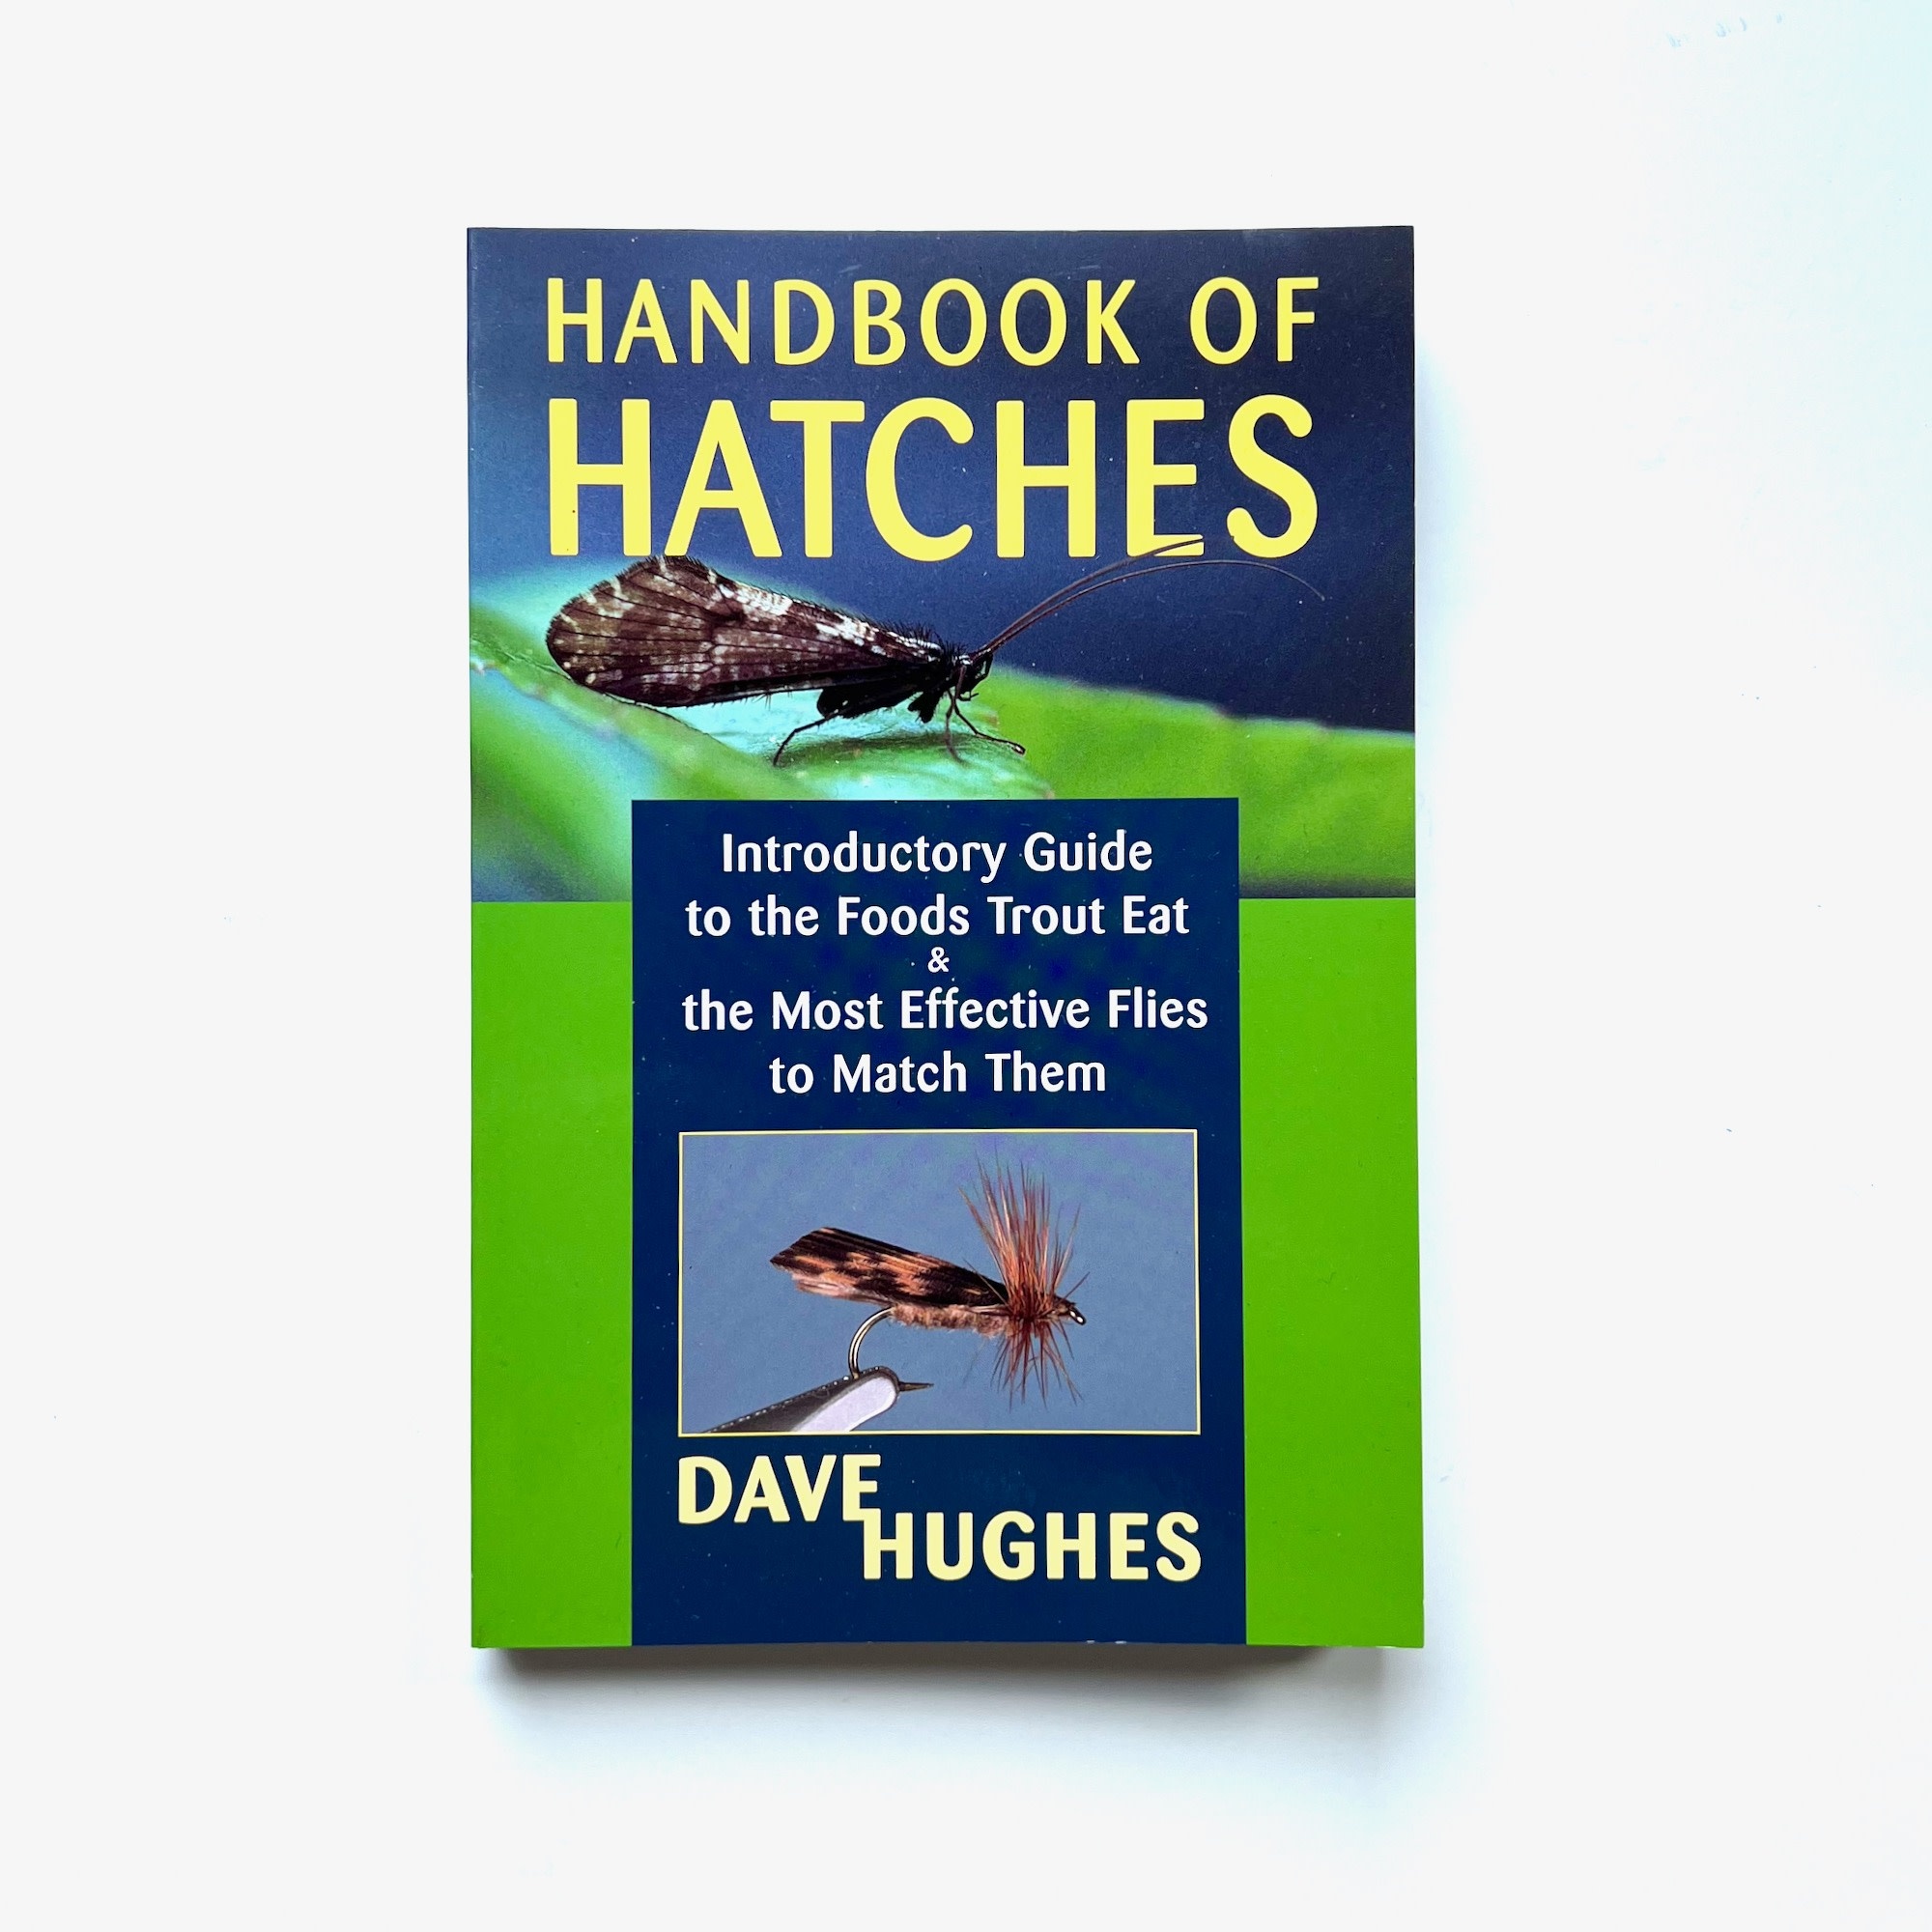 Handbook of Hatches: An Introductory Guide to the Foods Trout Eat